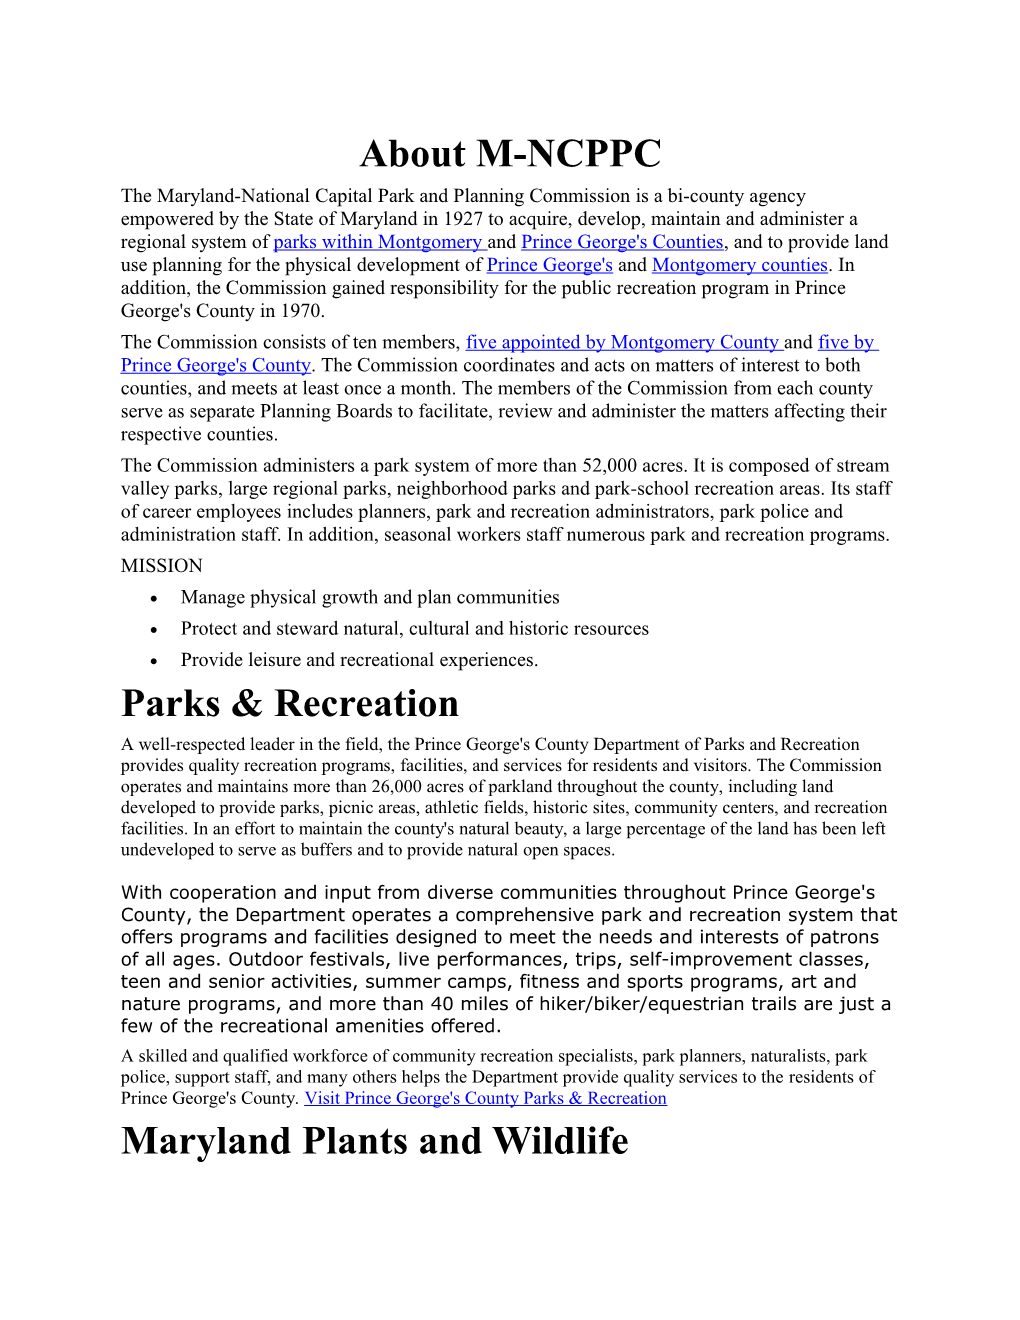 The Maryland-National Capital Park and Planning Commission Is a Bi-County Agency Empowered